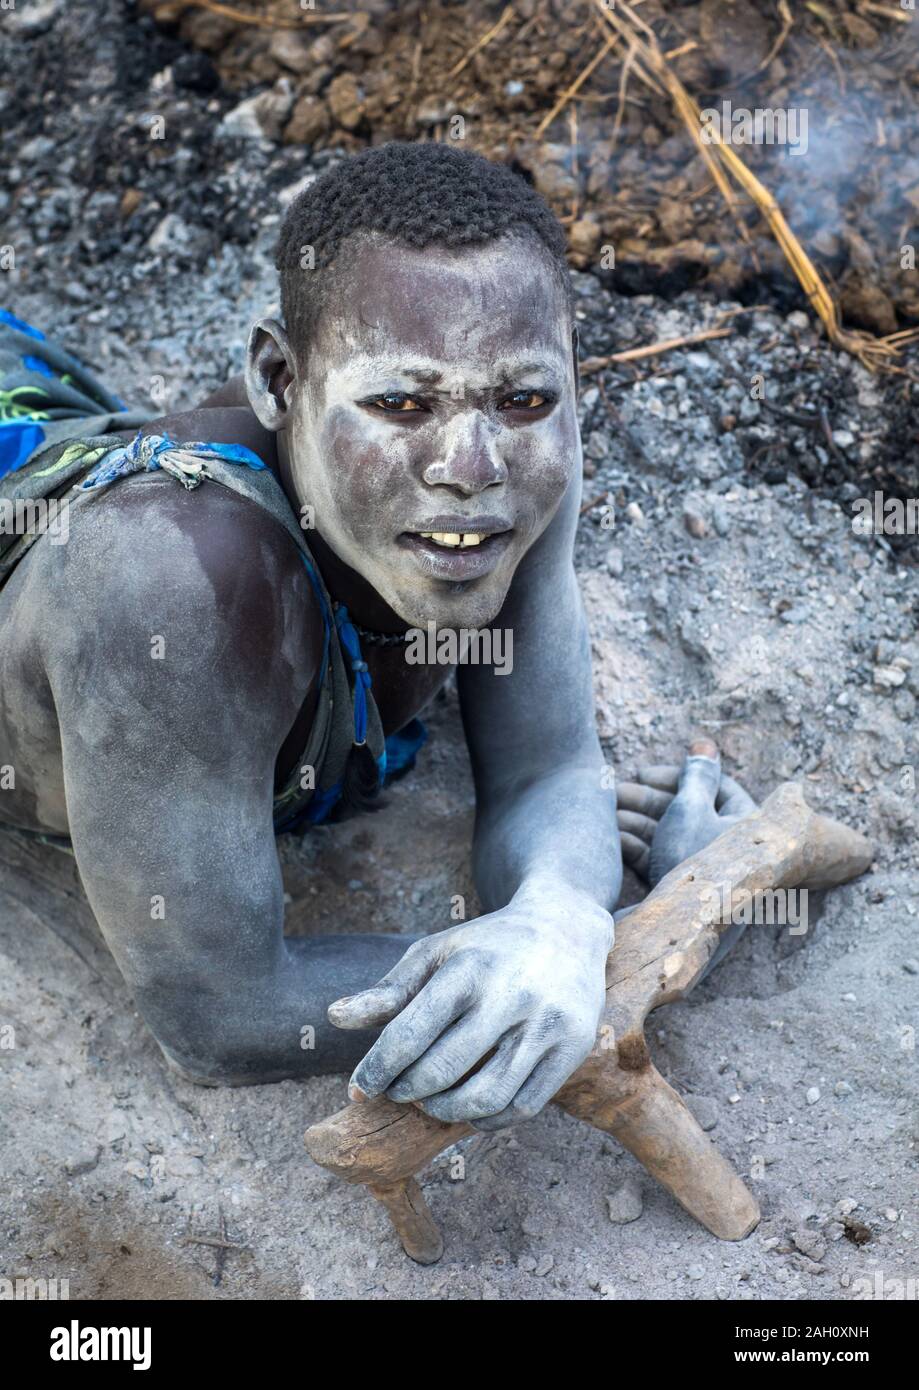 Mundari tribe man covered in ash to repel flies and mosquitoes, Central Equatoria, Terekeka, South Sudan Stock Photo